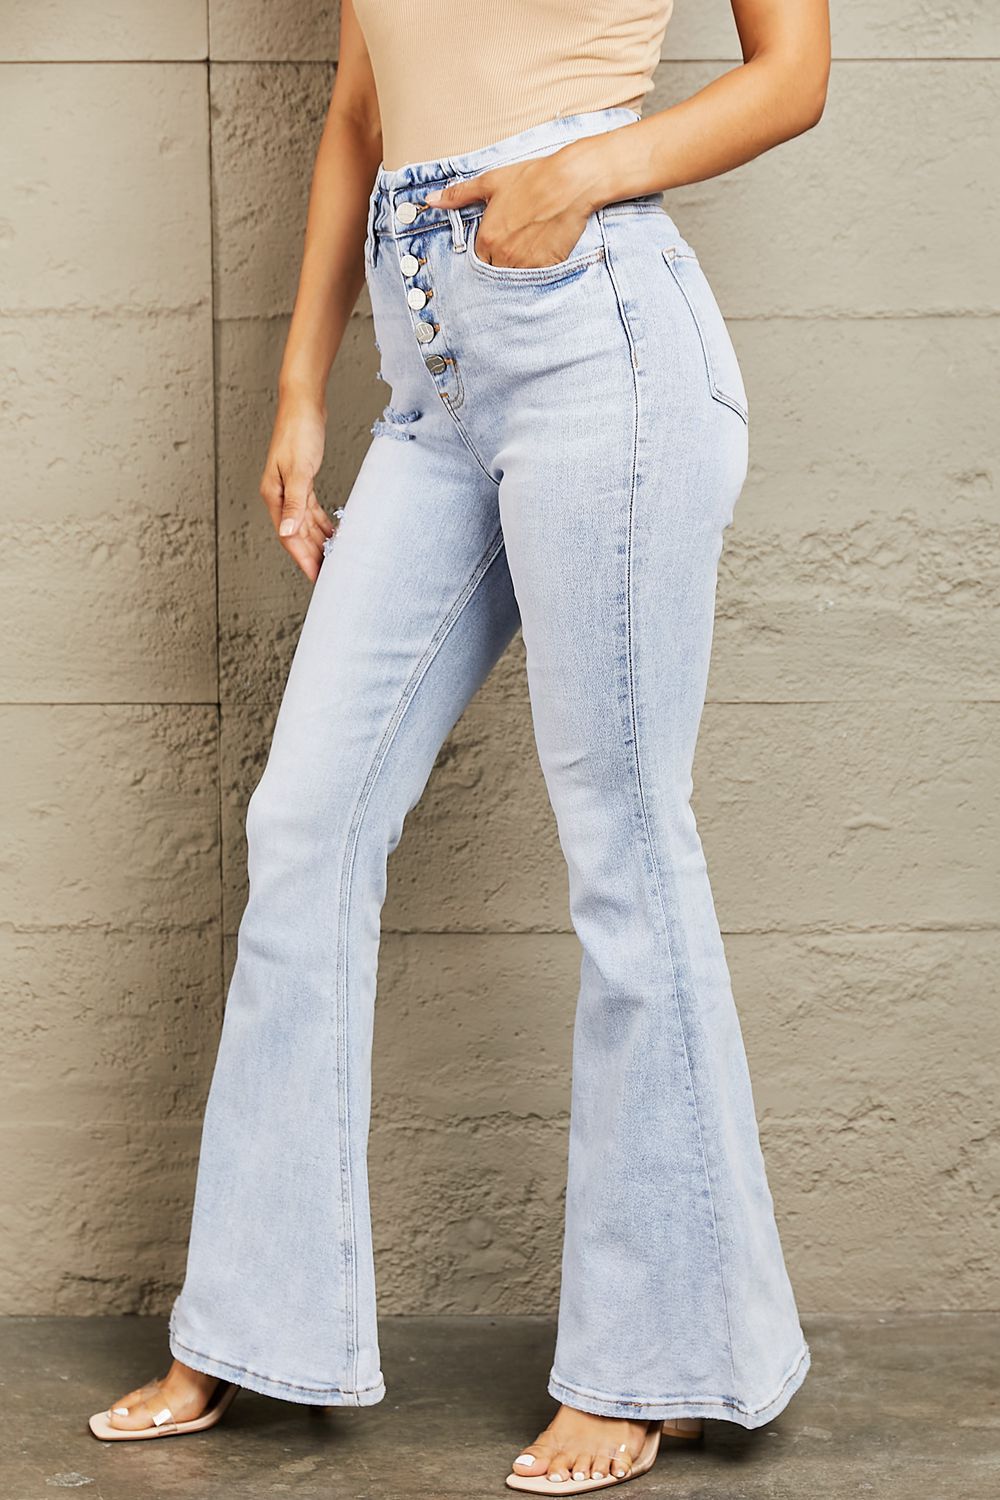 BAYEAS High Waisted Button Fly Flare Jeans - nailedmoms